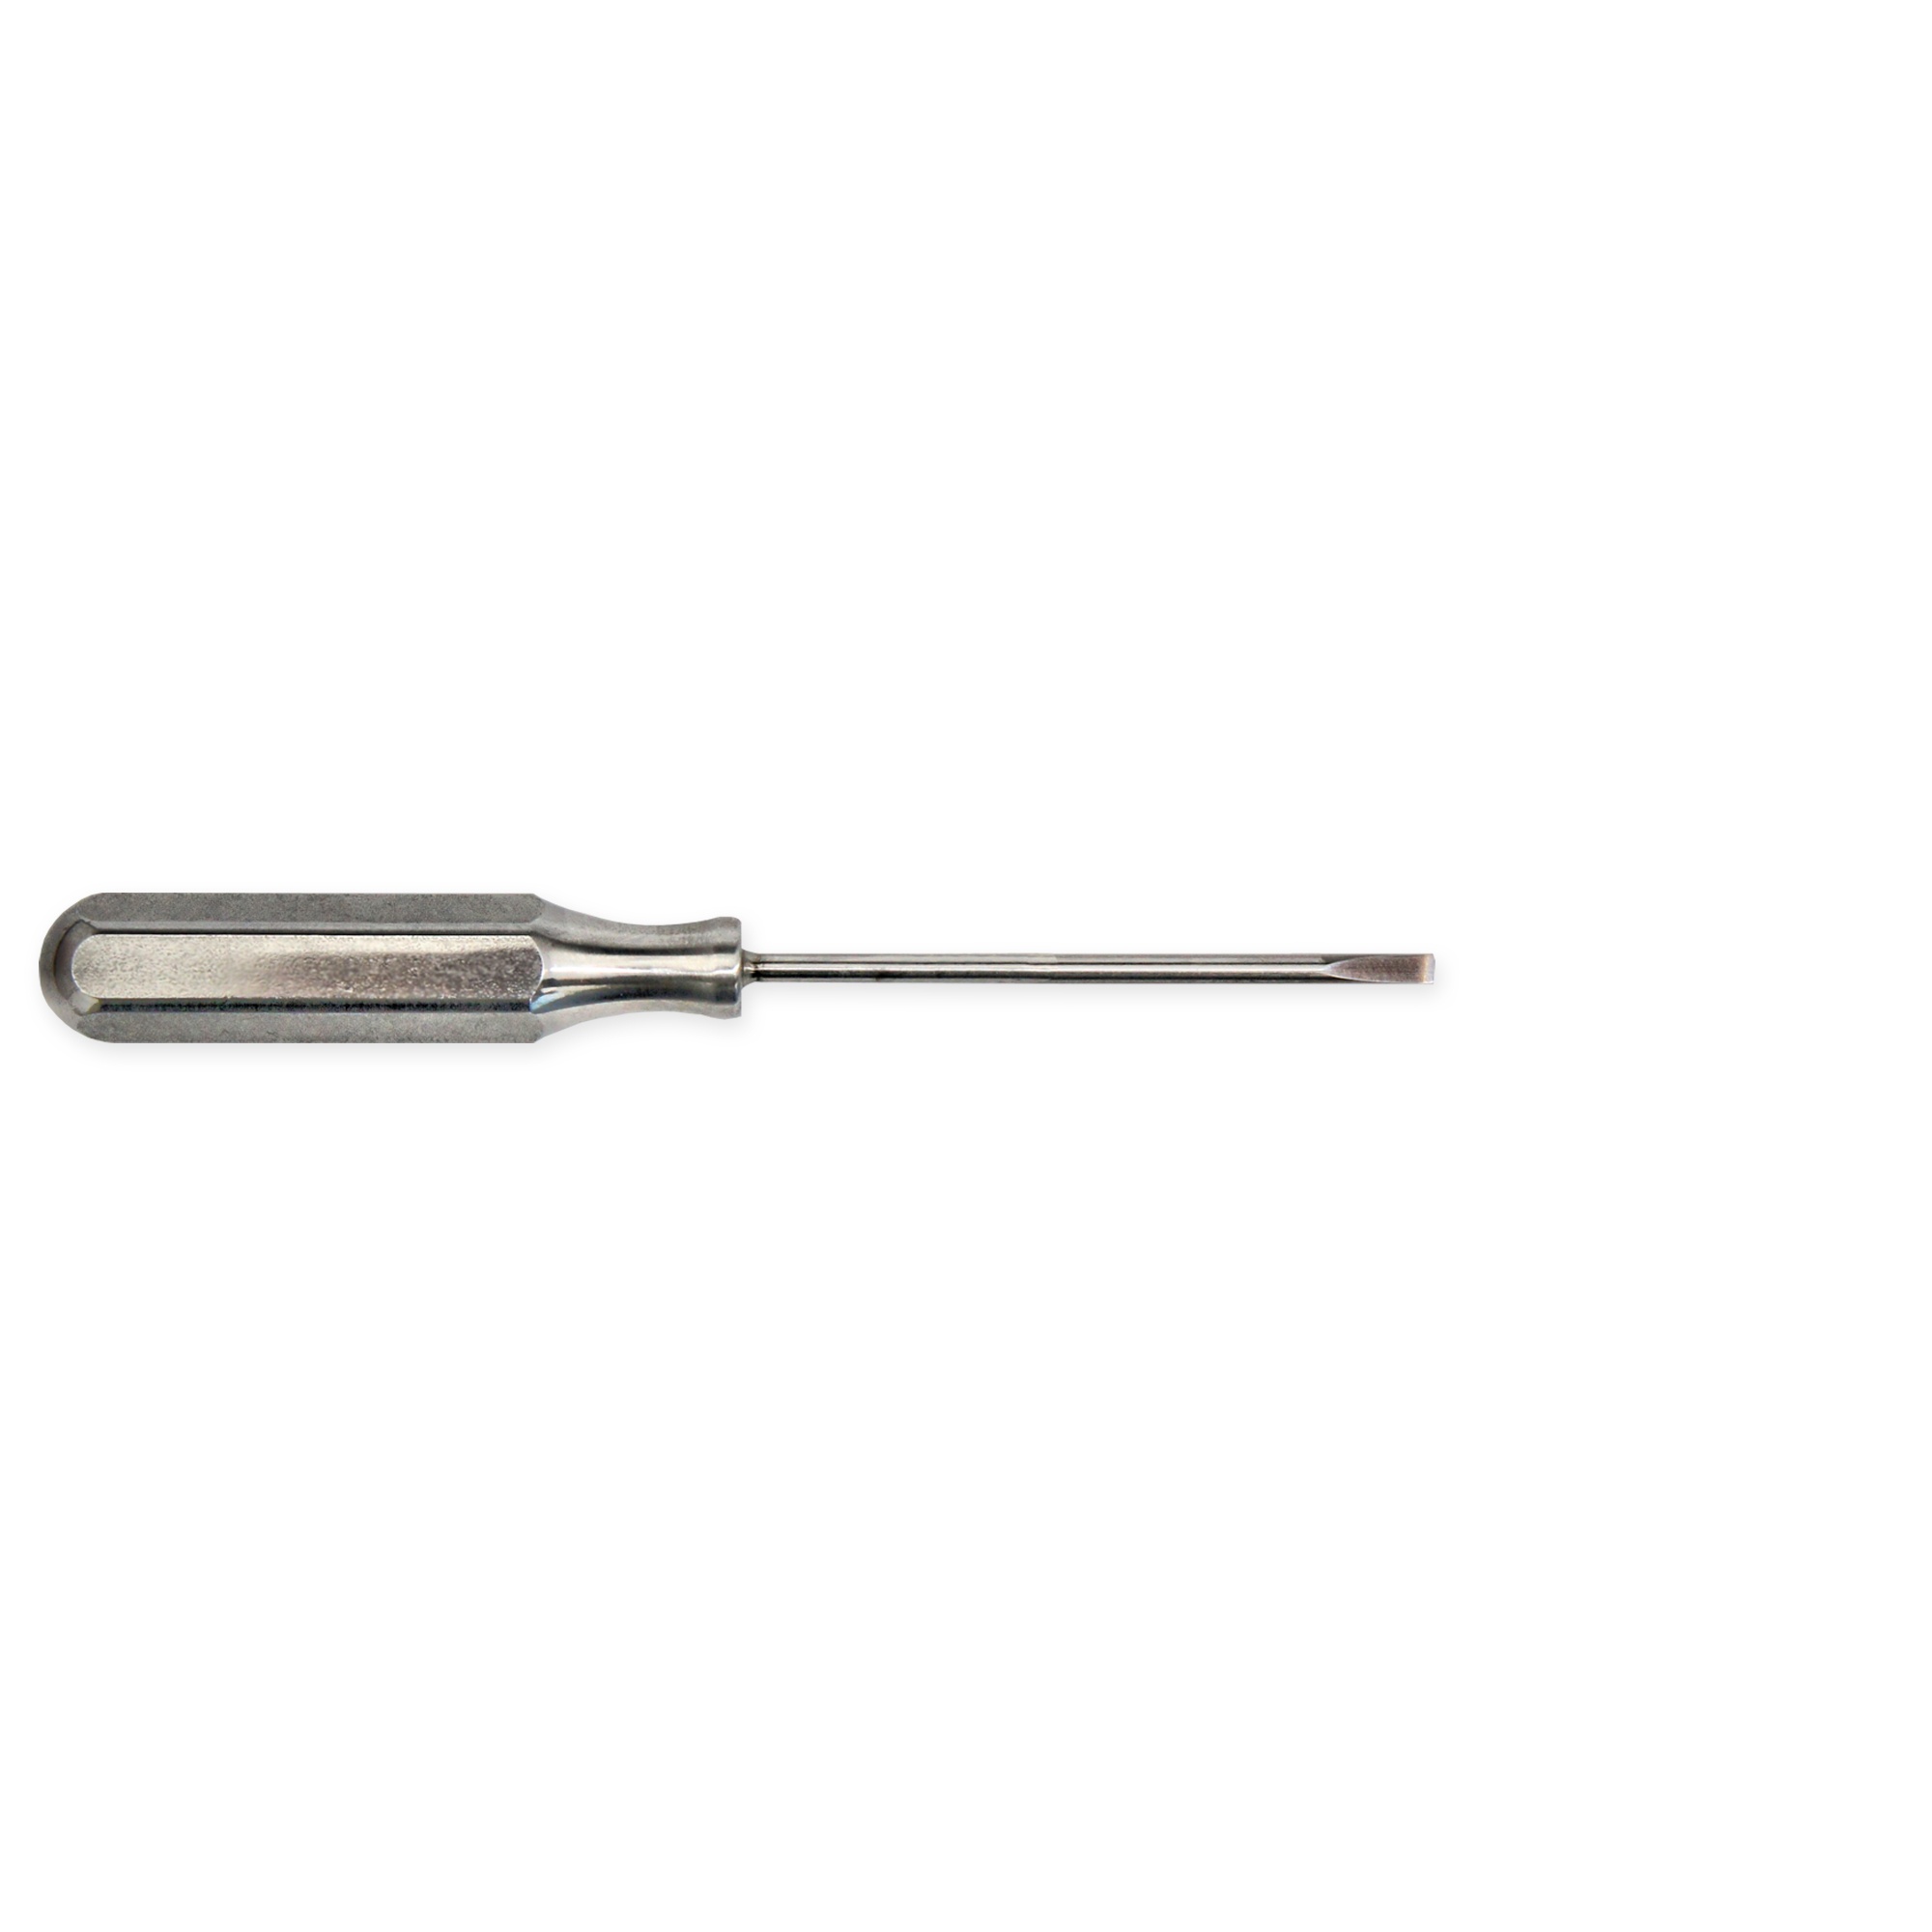 Screwdriver with Pointed Plate Image